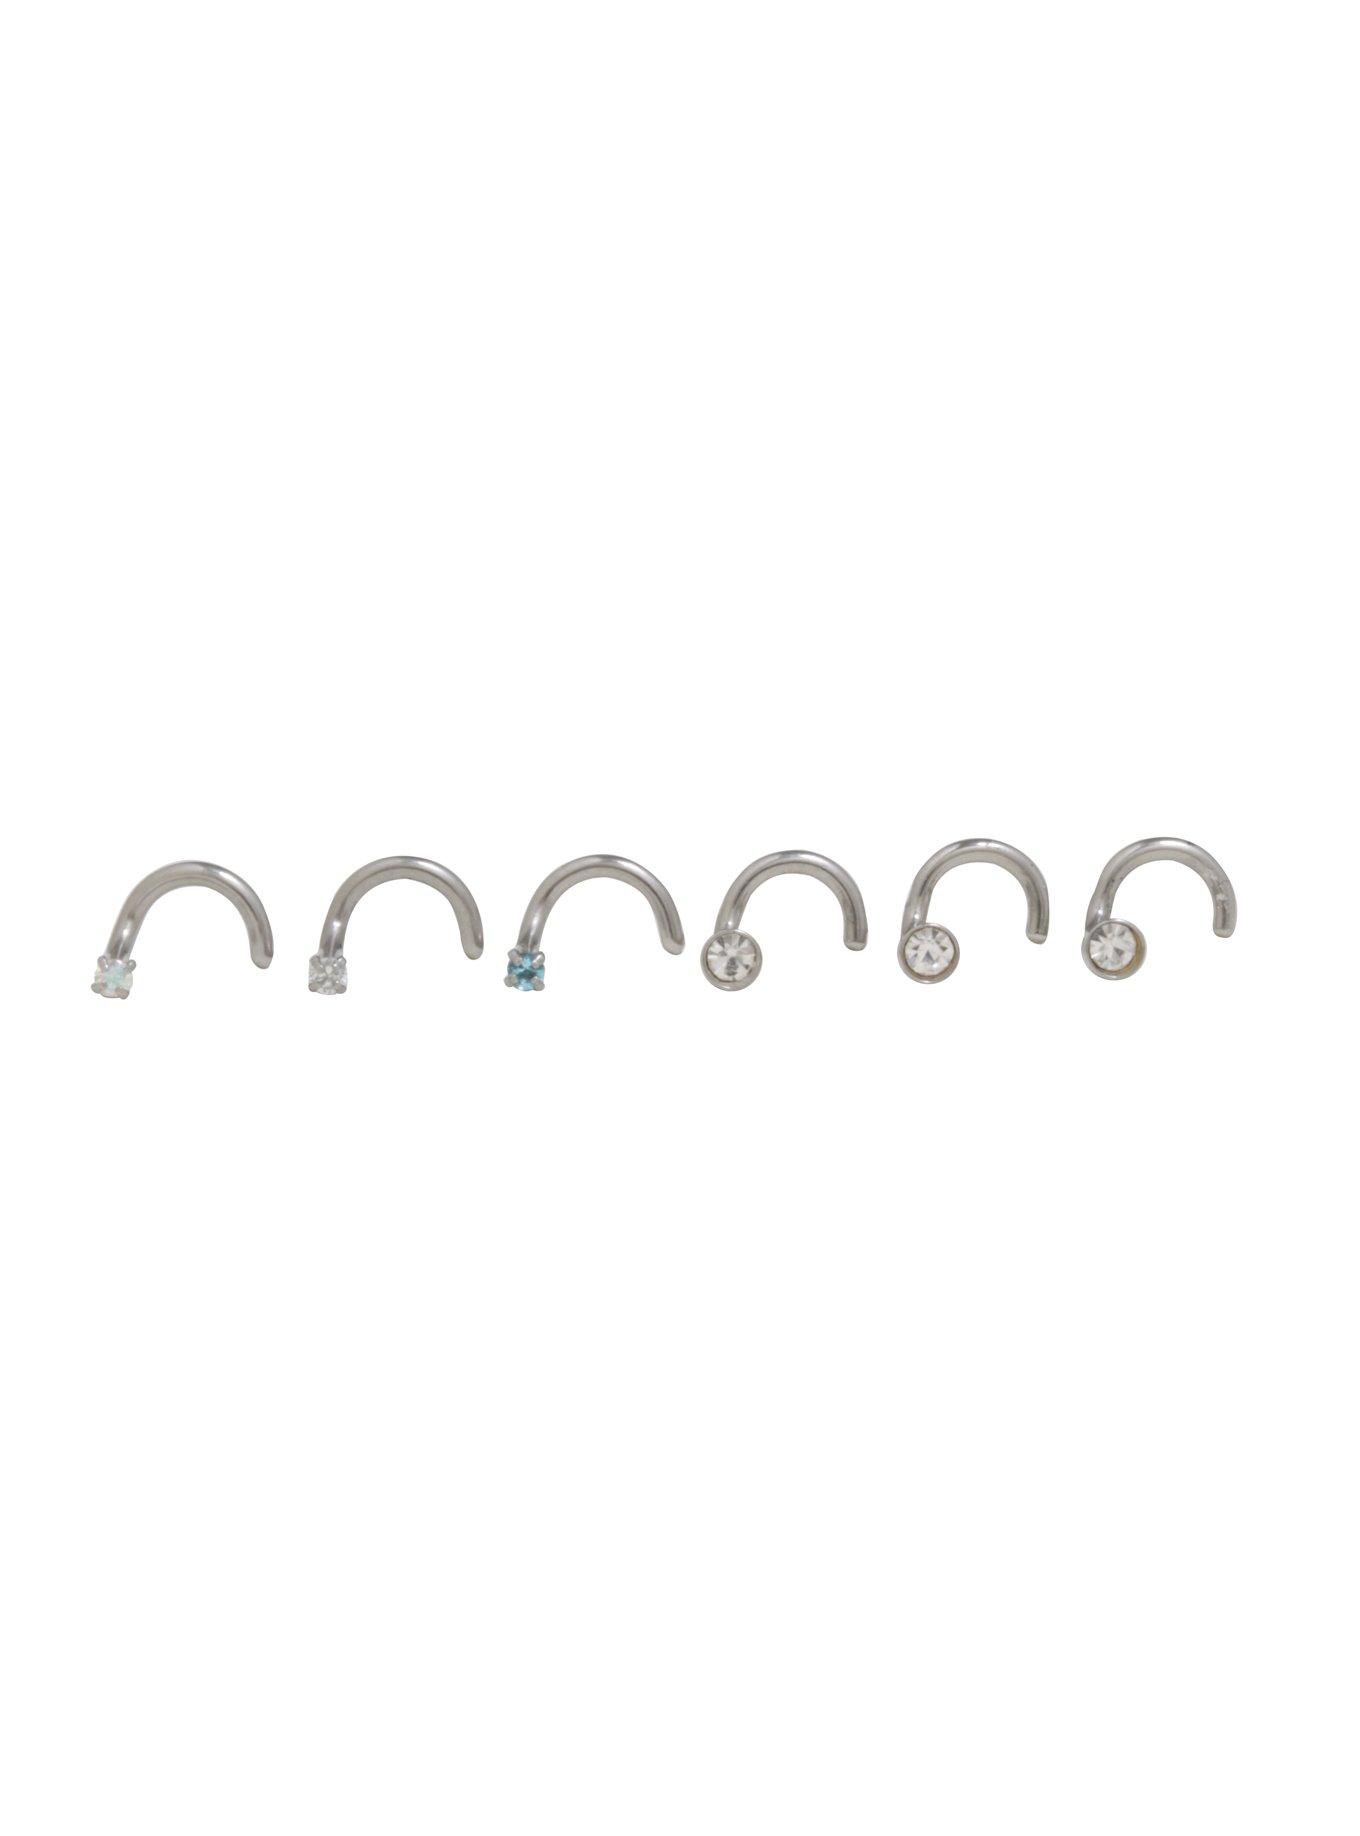 Steel Pronged AB Blue & Clear CZ Nose Screw 6 Pack, MULTI, hi-res